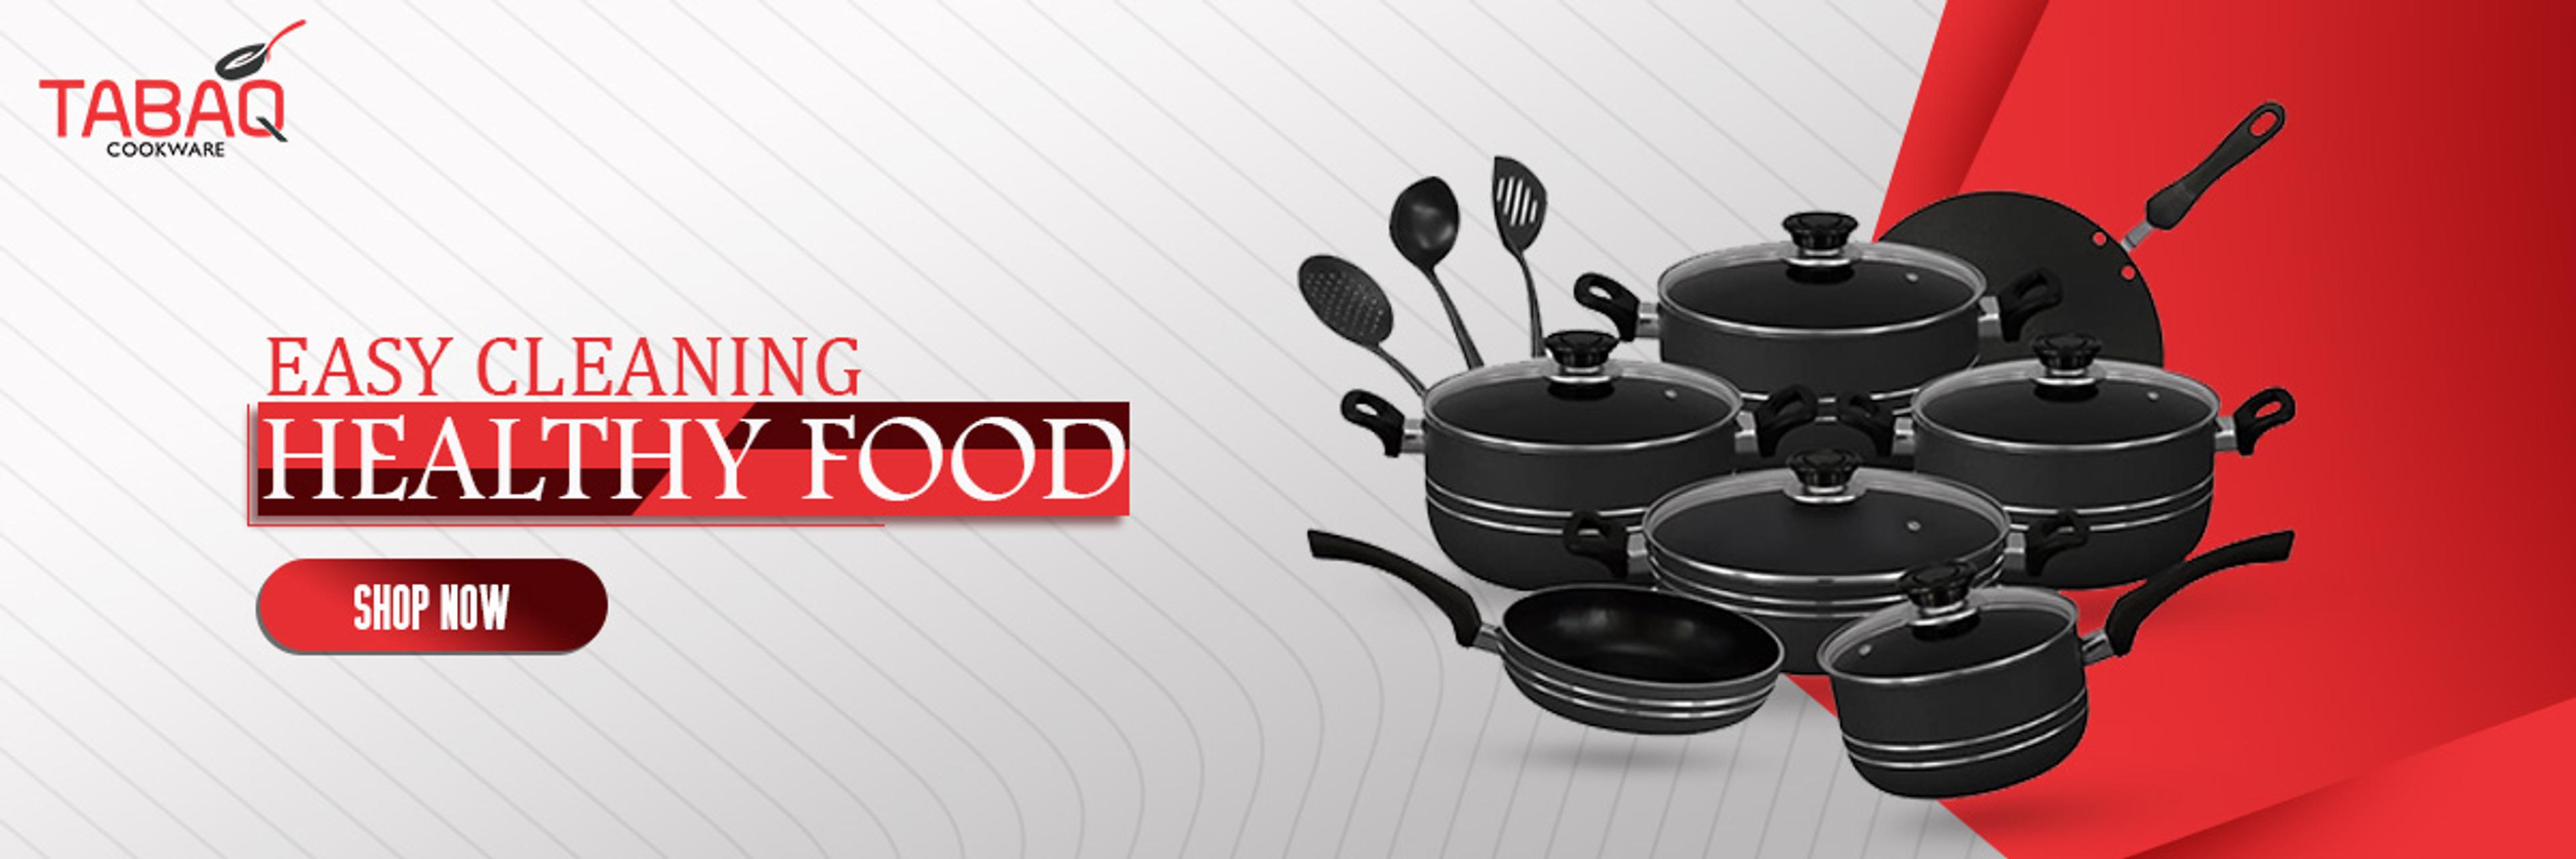 Tabaq Cookware